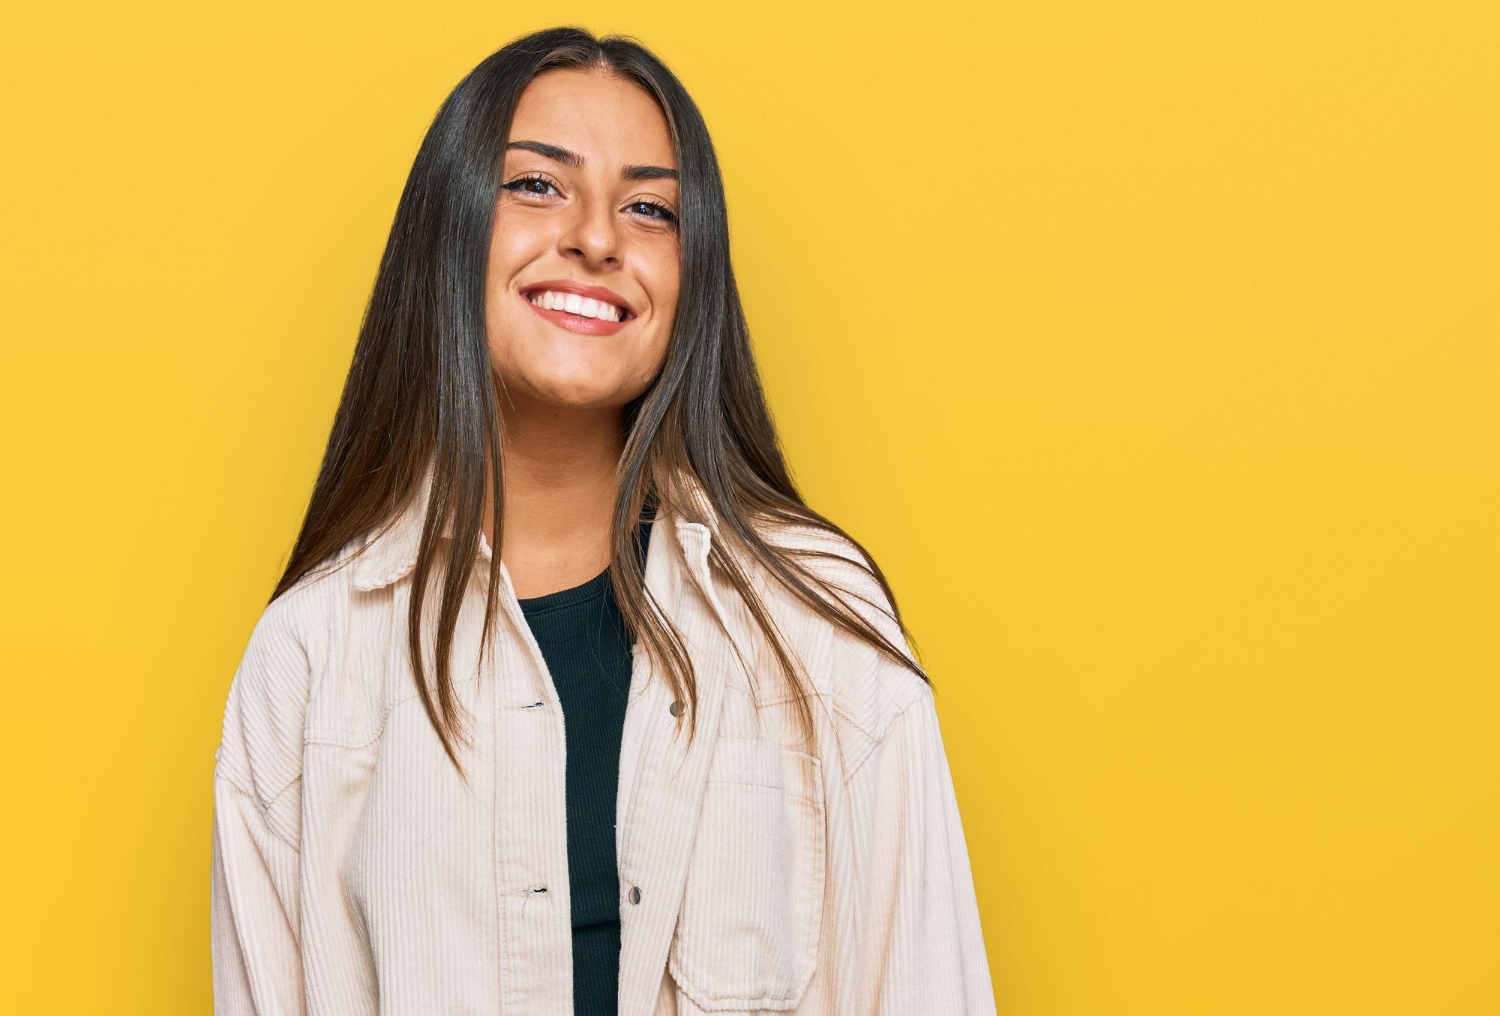 beautiful hispanic woman wearing casual clothes looking positive happy standing smiling with confident smile showing teeth 1